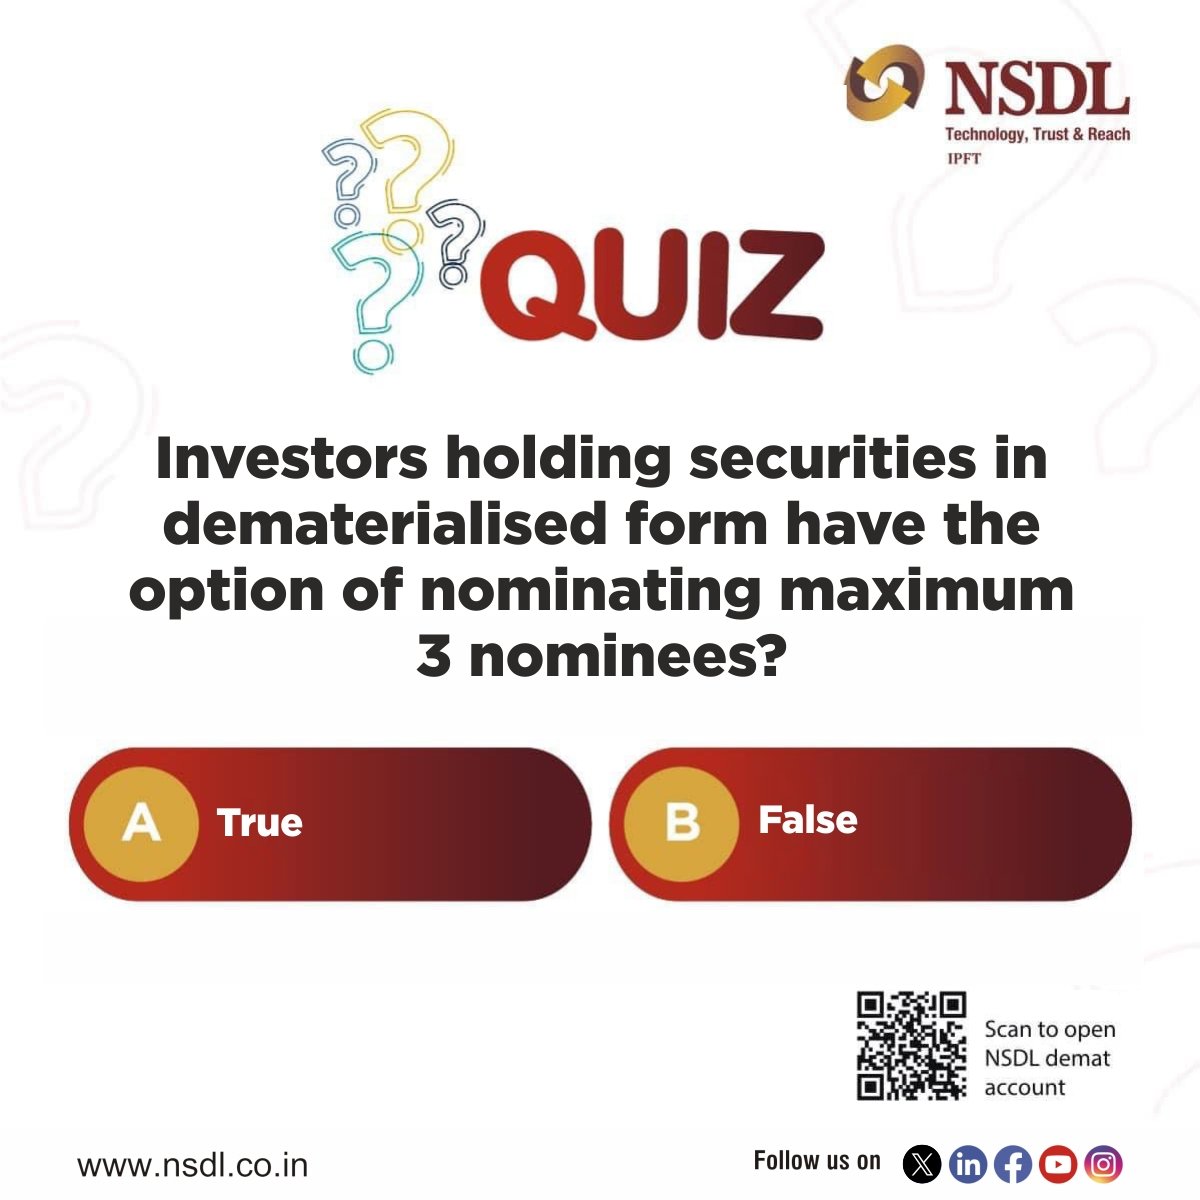 #Contest alert - Win prizes every week! To enter the quiz leave the correct answer in the comments below and stand a chance to win exciting prizes! 1) Follow NSDL on all of its social media channels. Facebook, facebook.com/nsdl.co.in LinkedIn, linkedin.com/company/nation…